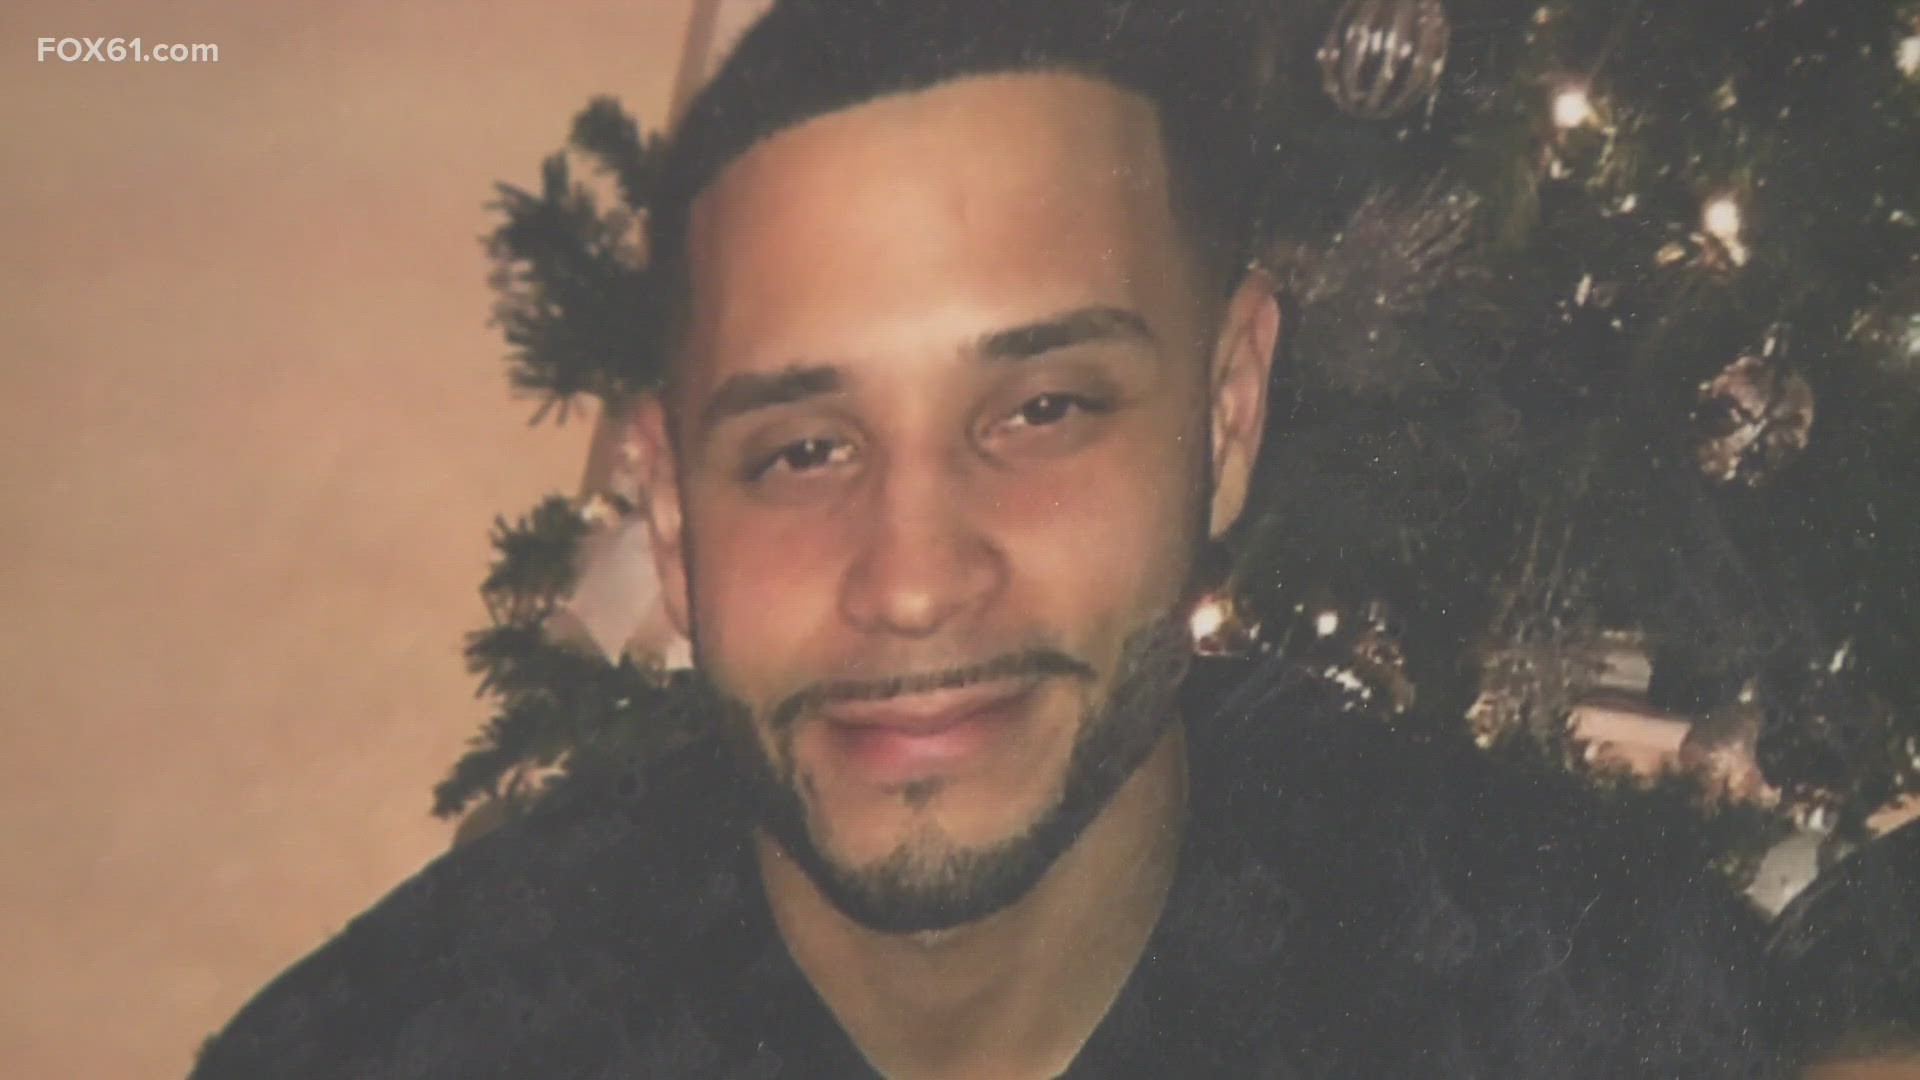 The shooting investigation lasted years, with Diaz's family offering a $500,000 reward this past January for information leading to an arrest.